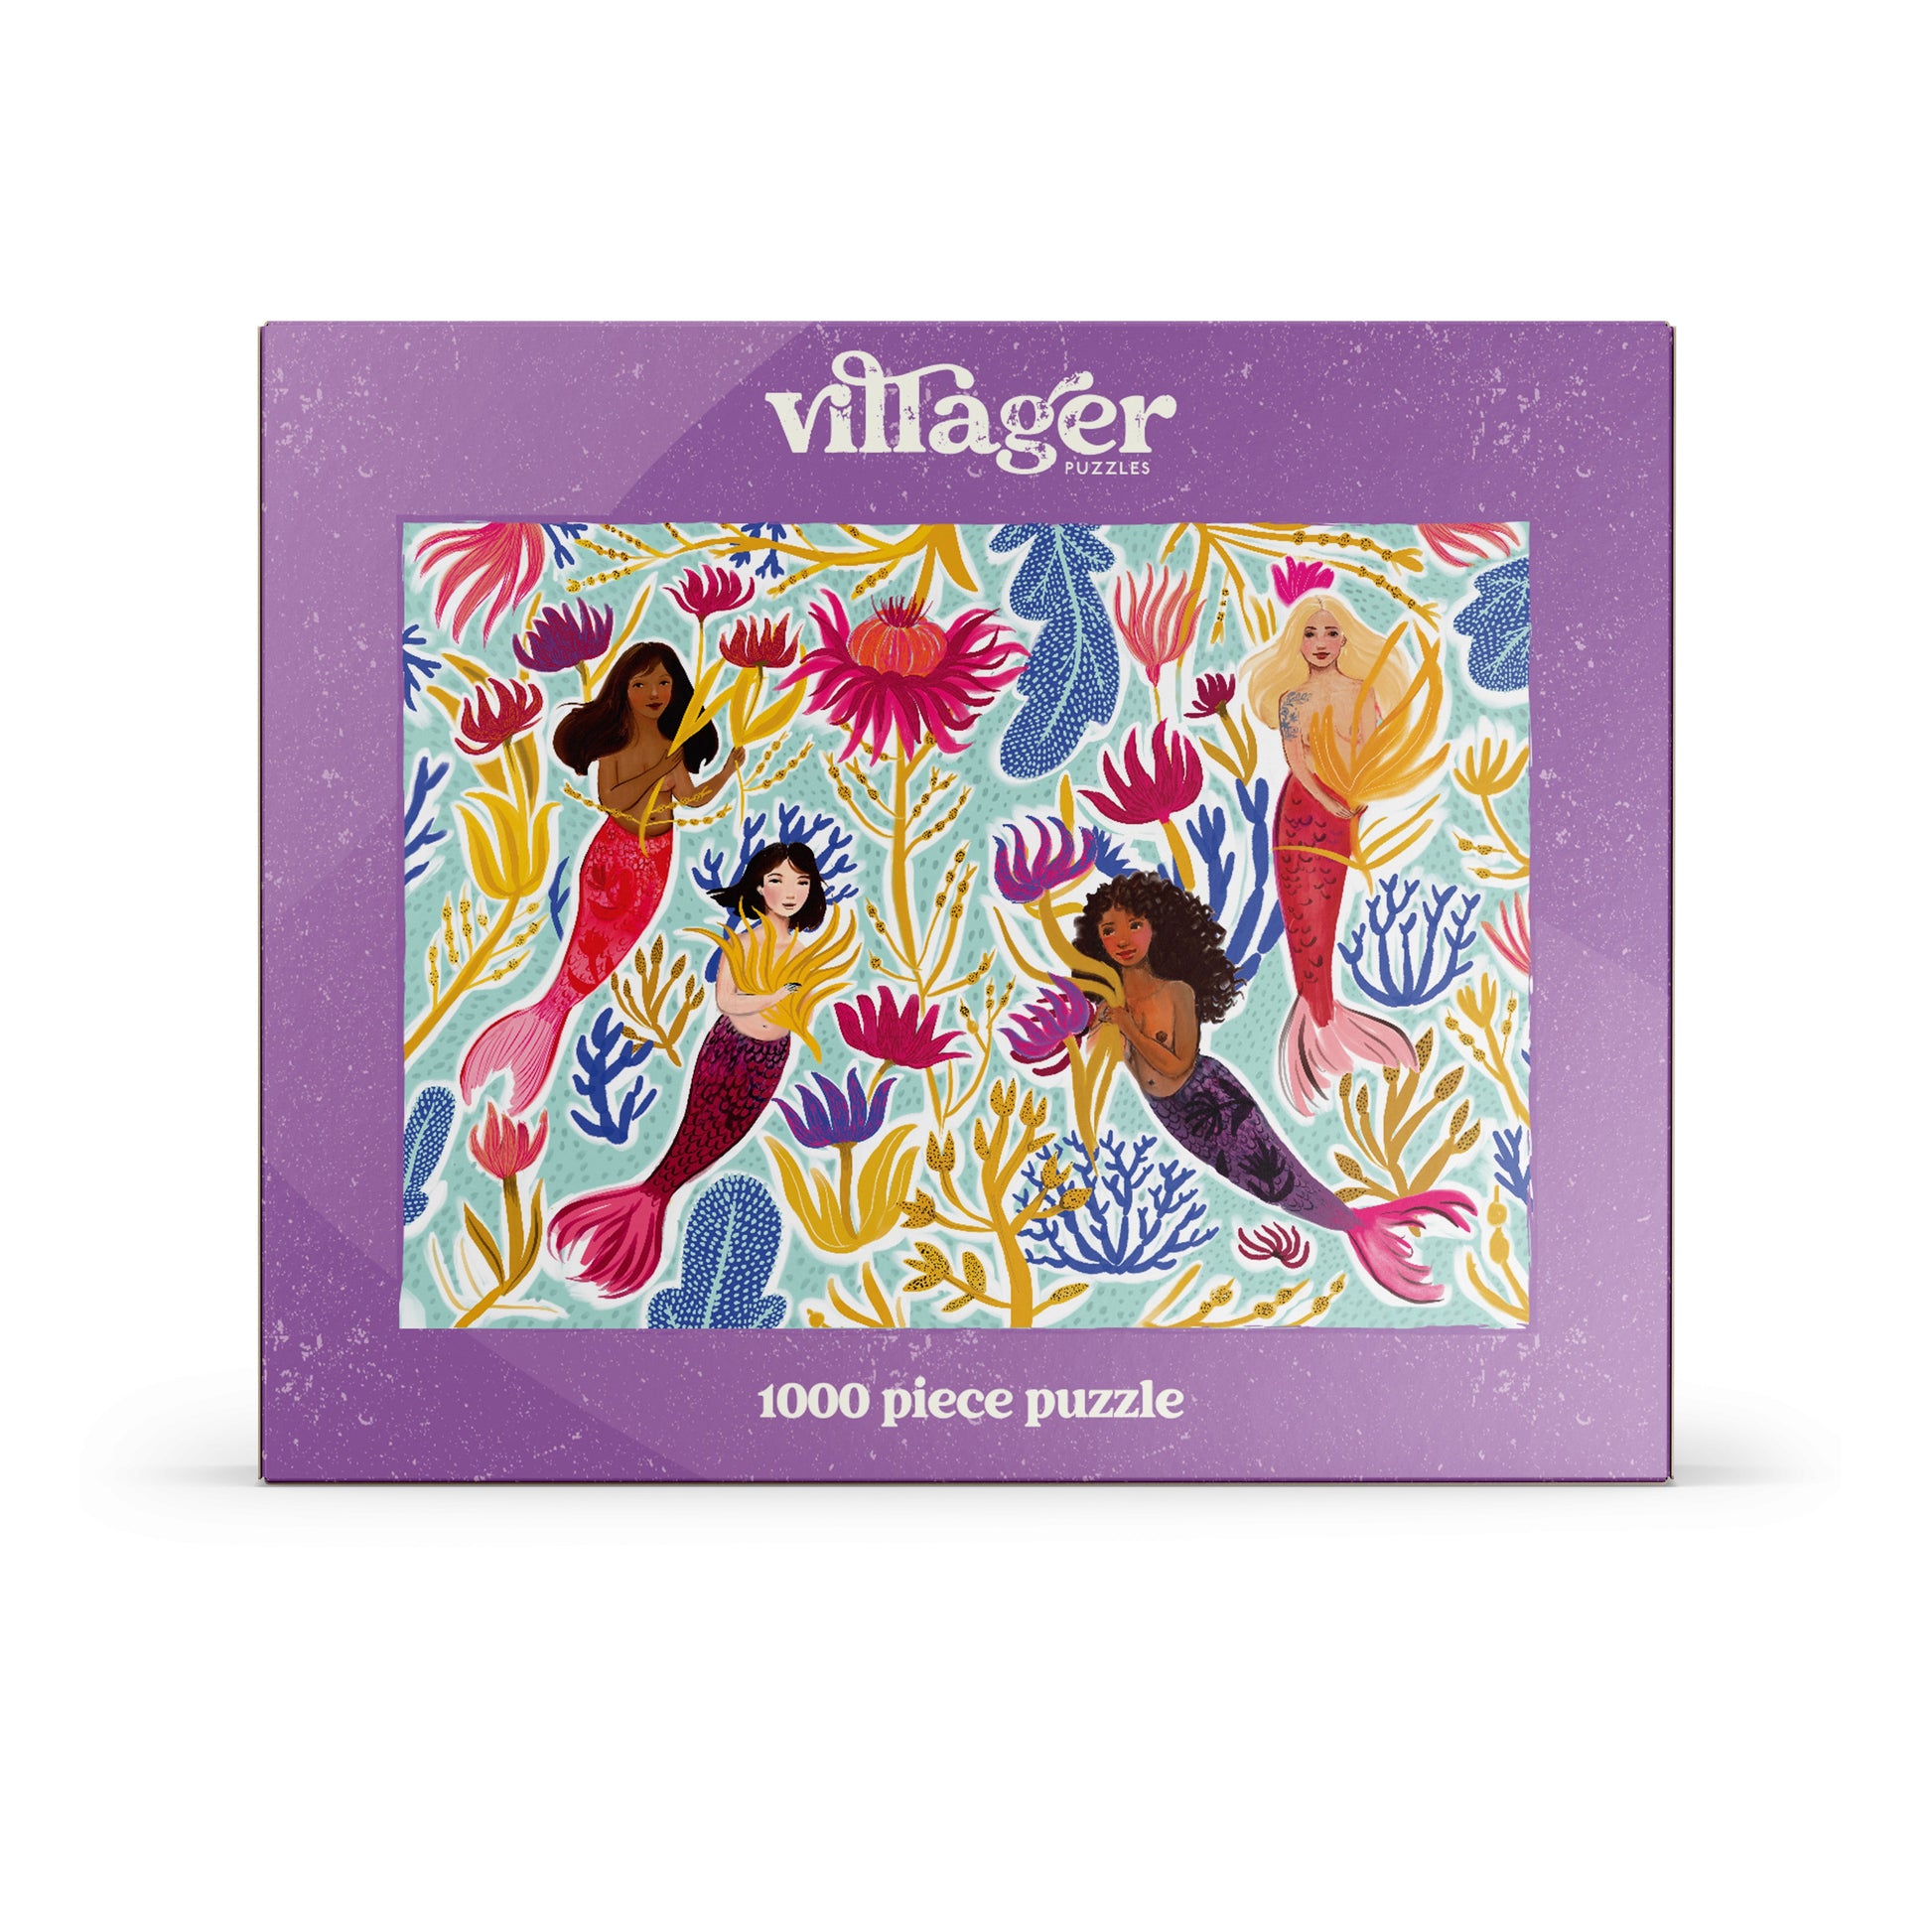 Front box image of Villager Puzzle | Mermaid Life designed by Briana Corr Scott of Halifax, NS Canada